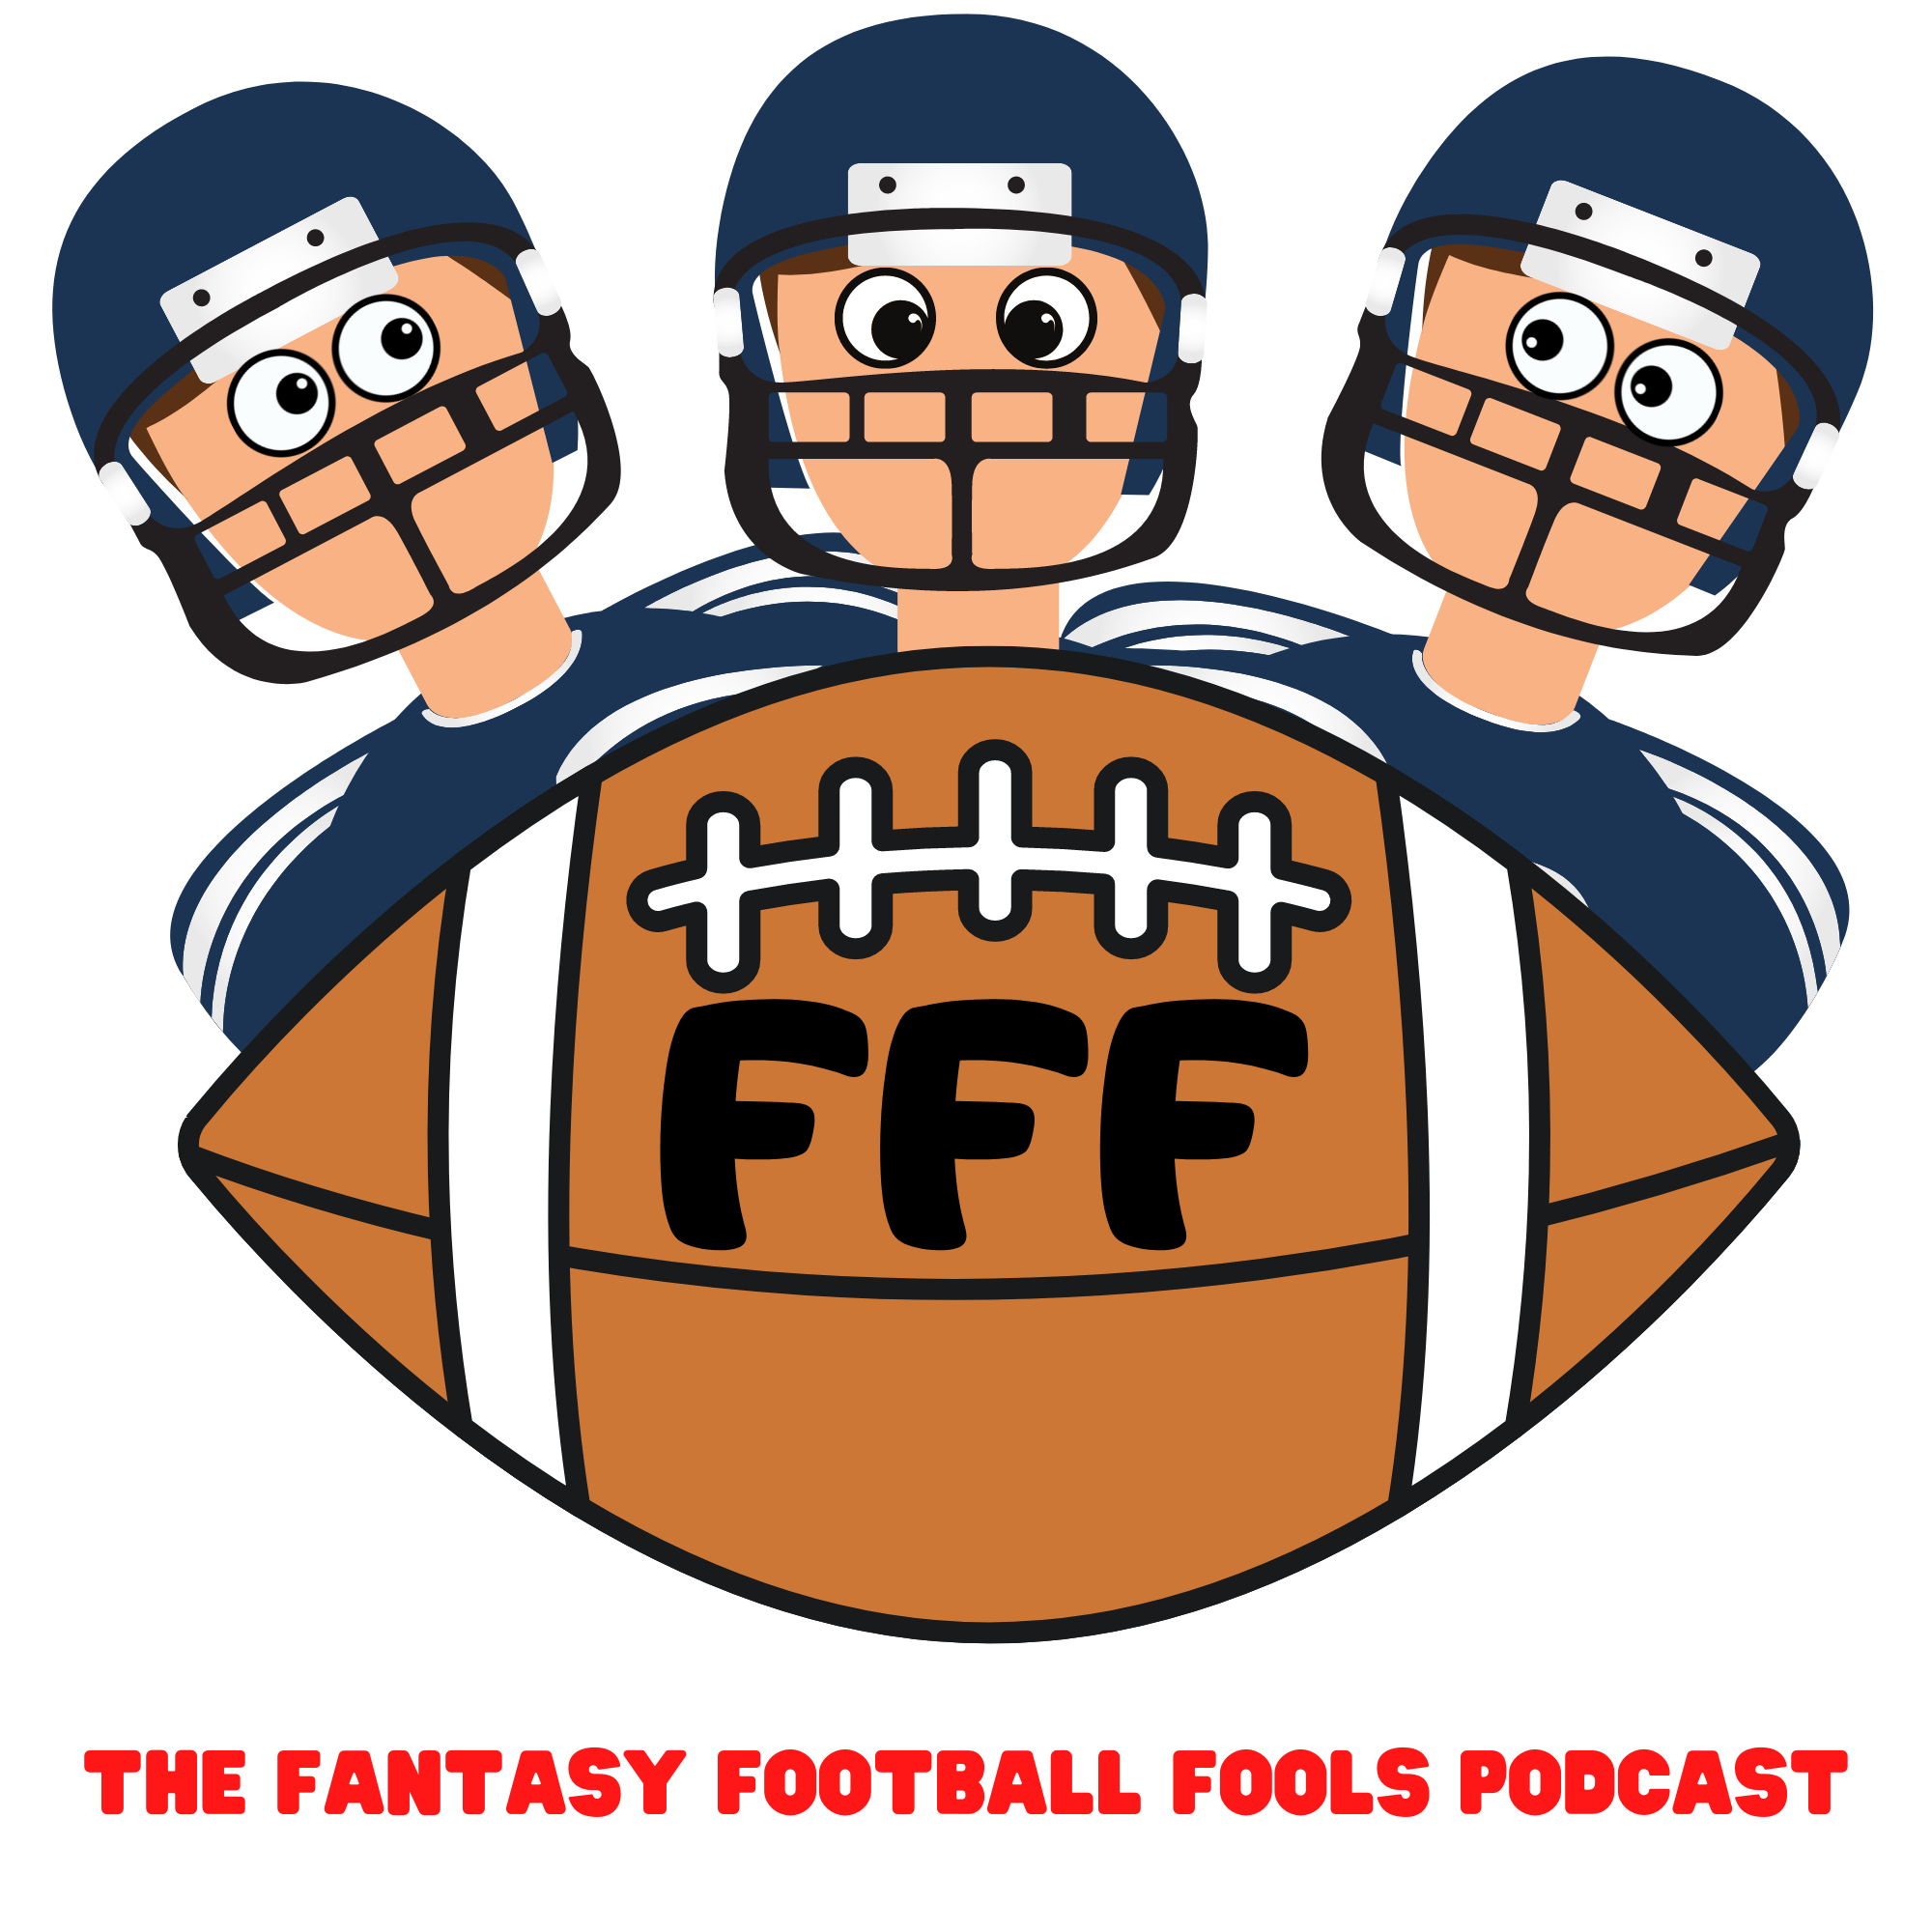 Breakouts, Sleepers, Values, Busts - Draft Strategies - Top 5 teams in 2022 - 8/17 Fantasy Football Podcast